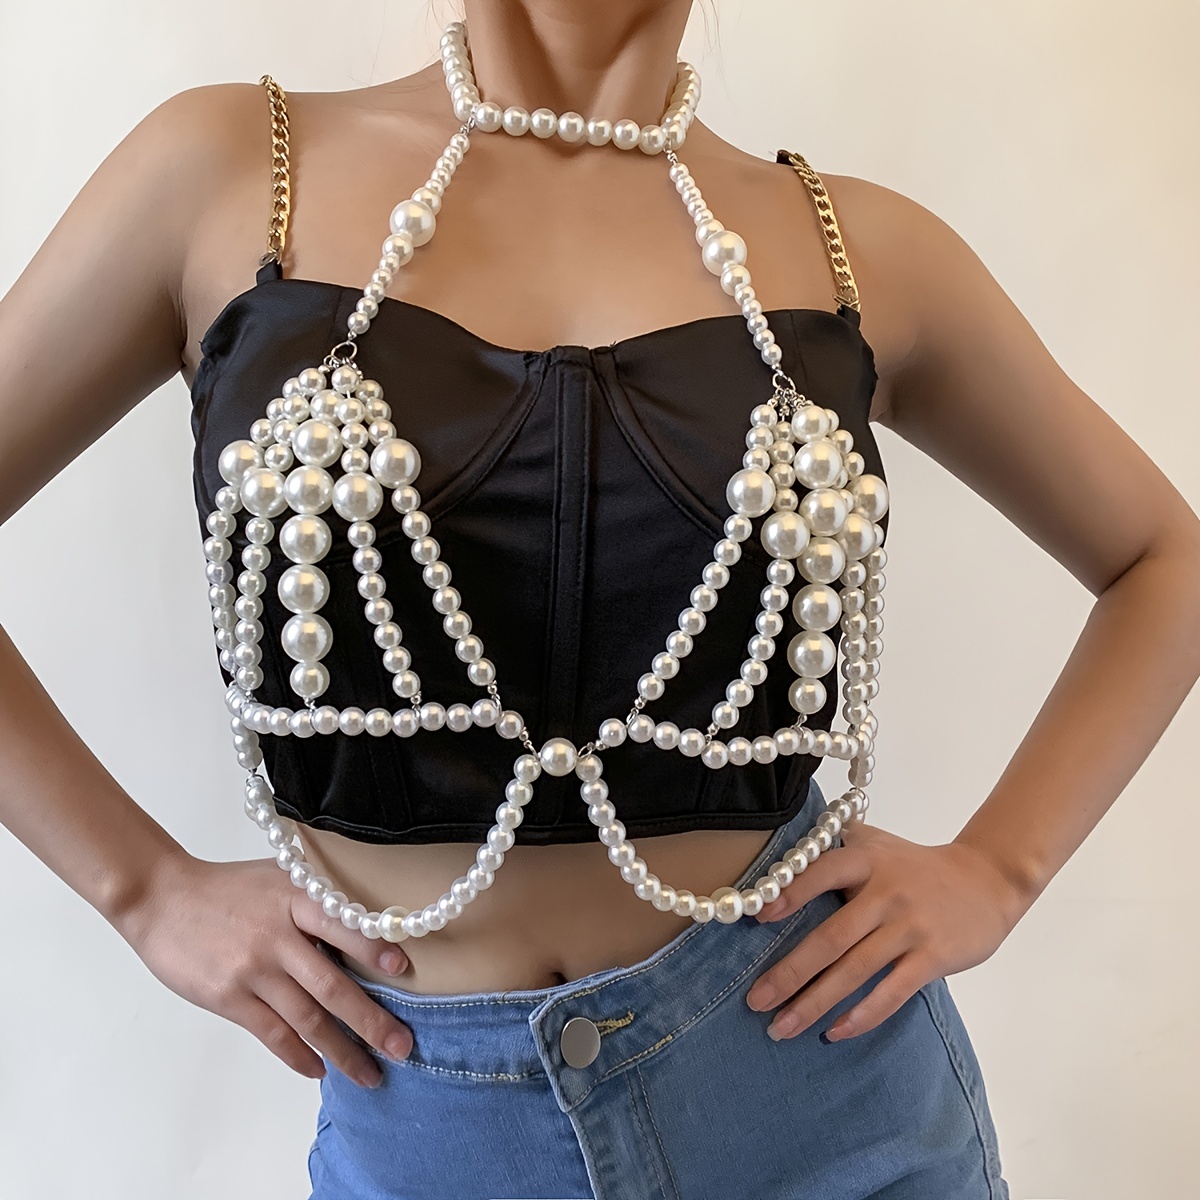 1pc White Large Faux Pearls Beads Beaded Body Chain Jewelry Exaggerated  Nightclub Rave Carnival Party Lingerie Decoration